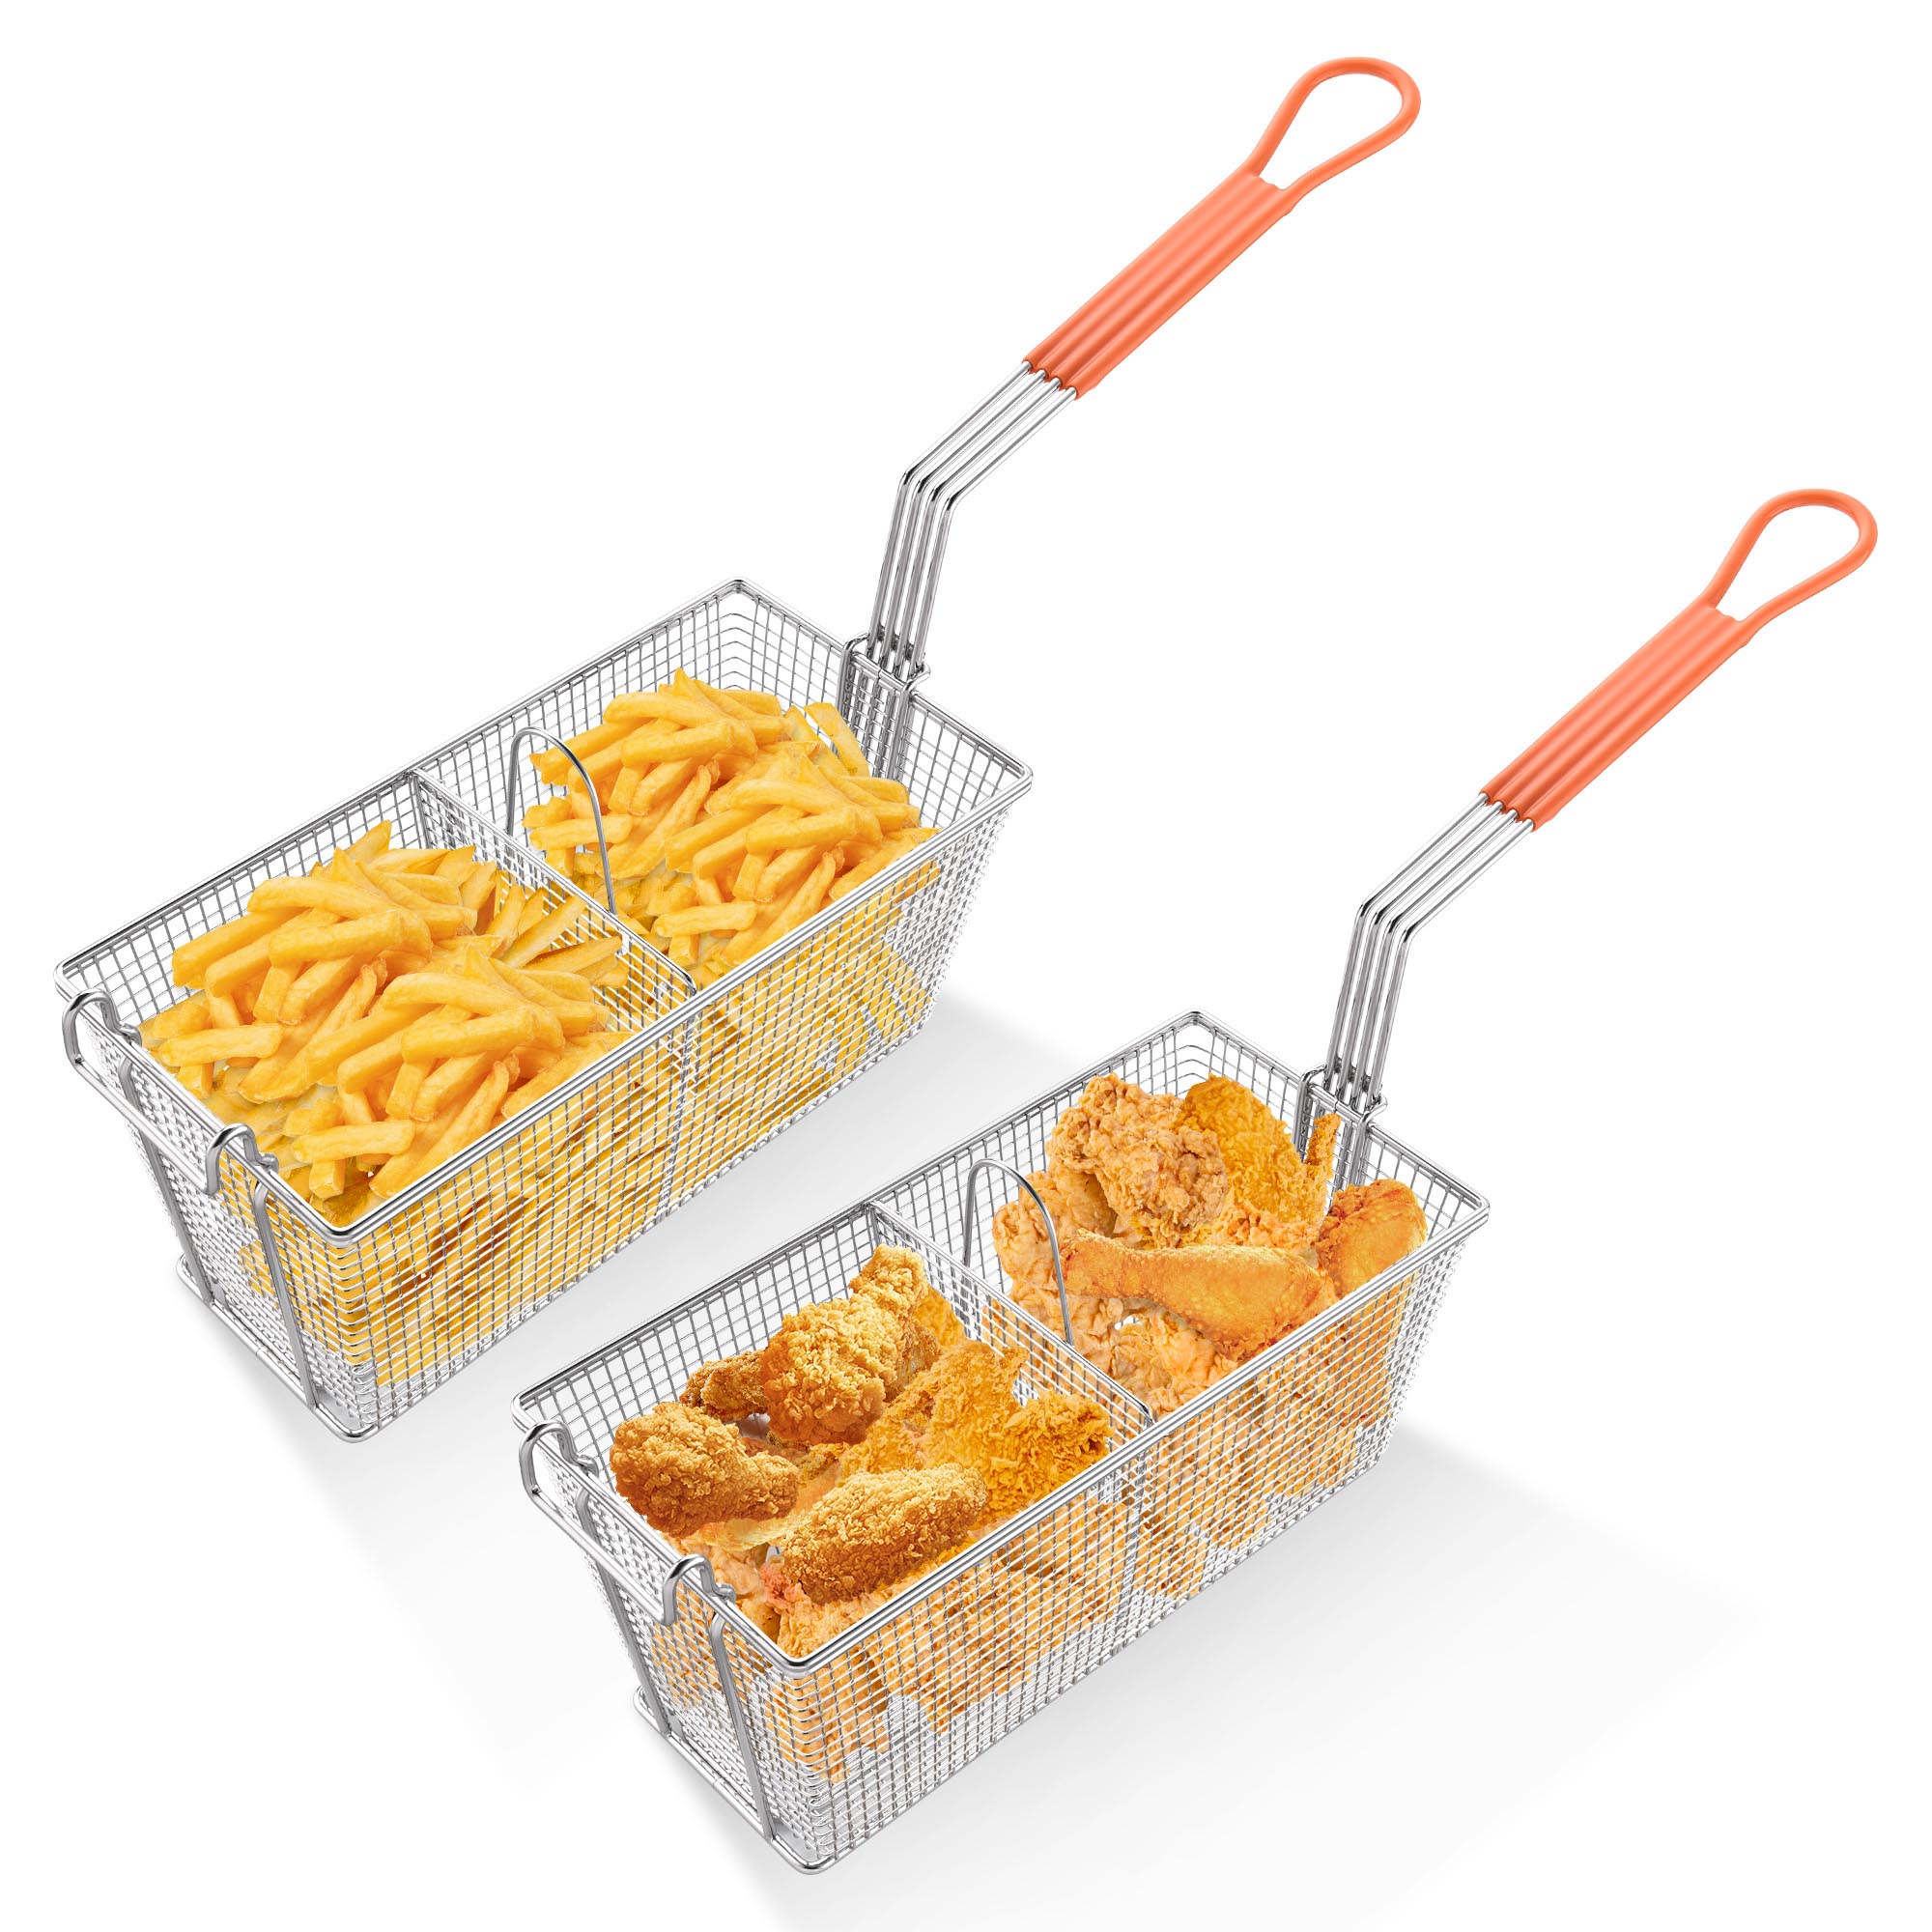 wechef 2 Packs Deep Fryer Basket with Divider Heavy Duty Construction Fryer Basket with Non-slip Handle for Commercial Restaurant